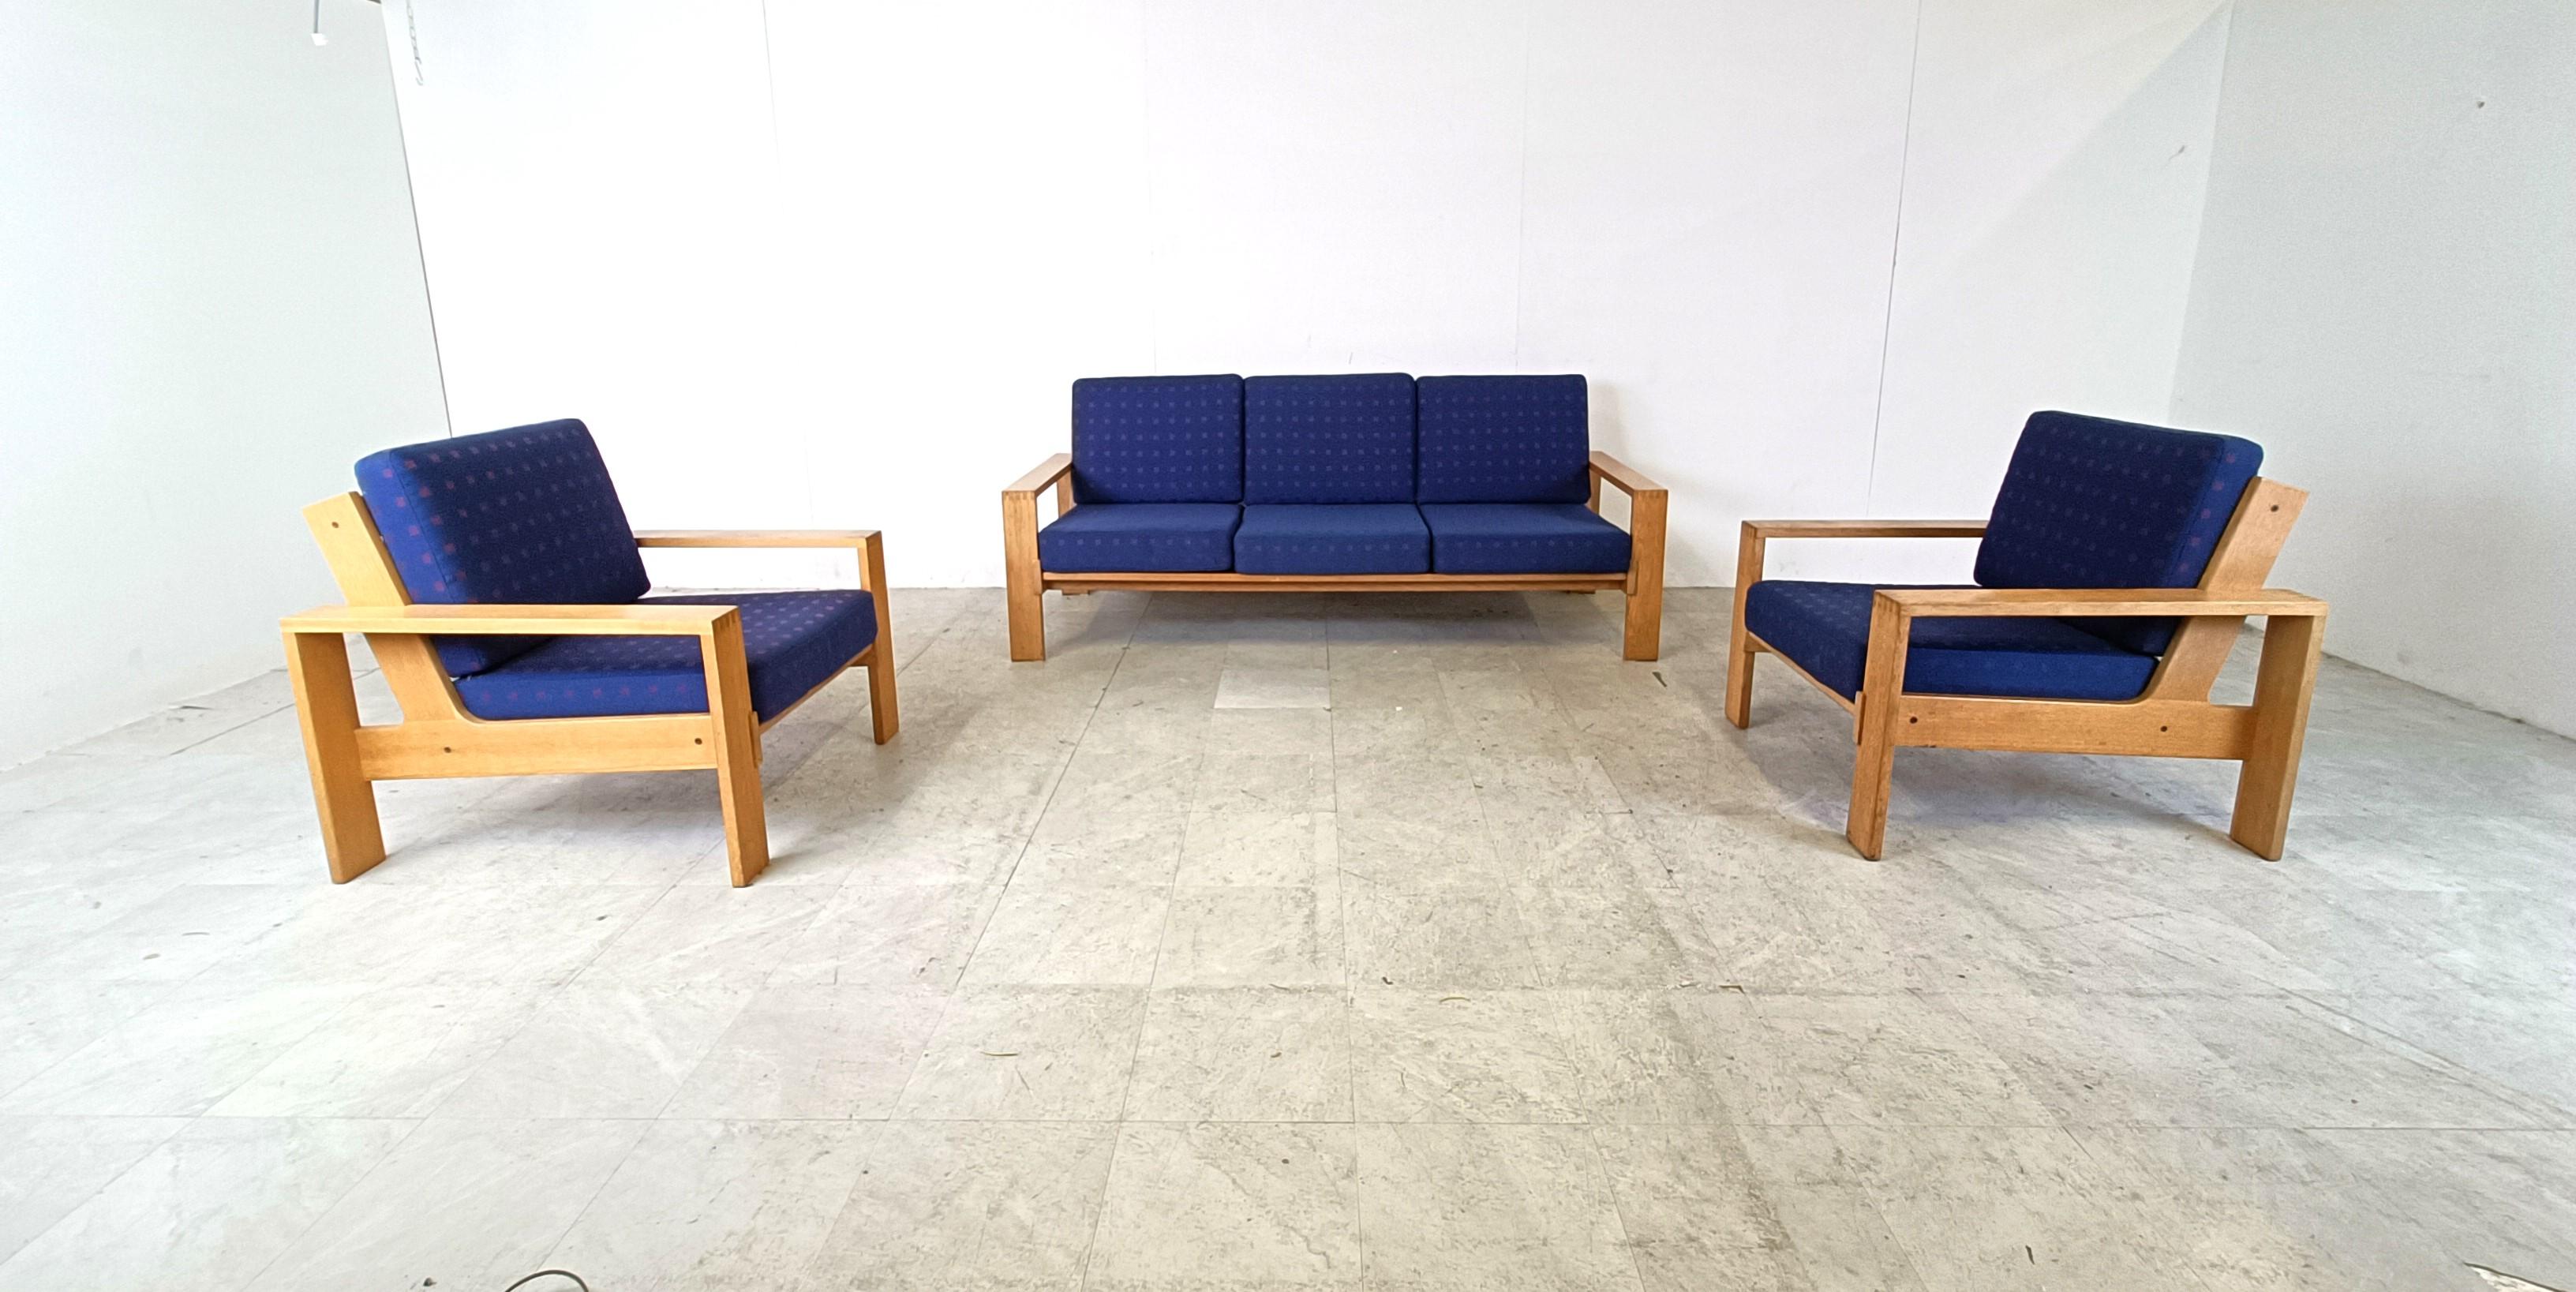 Vintage sofa set consisting of two armchairs and an three seater sofa.

The design is very much like the Asko 'Bonanza' sofas with interlocking wooden frames.

The sofas have their original blue fabric cushions. 

Very good condition

1970s -